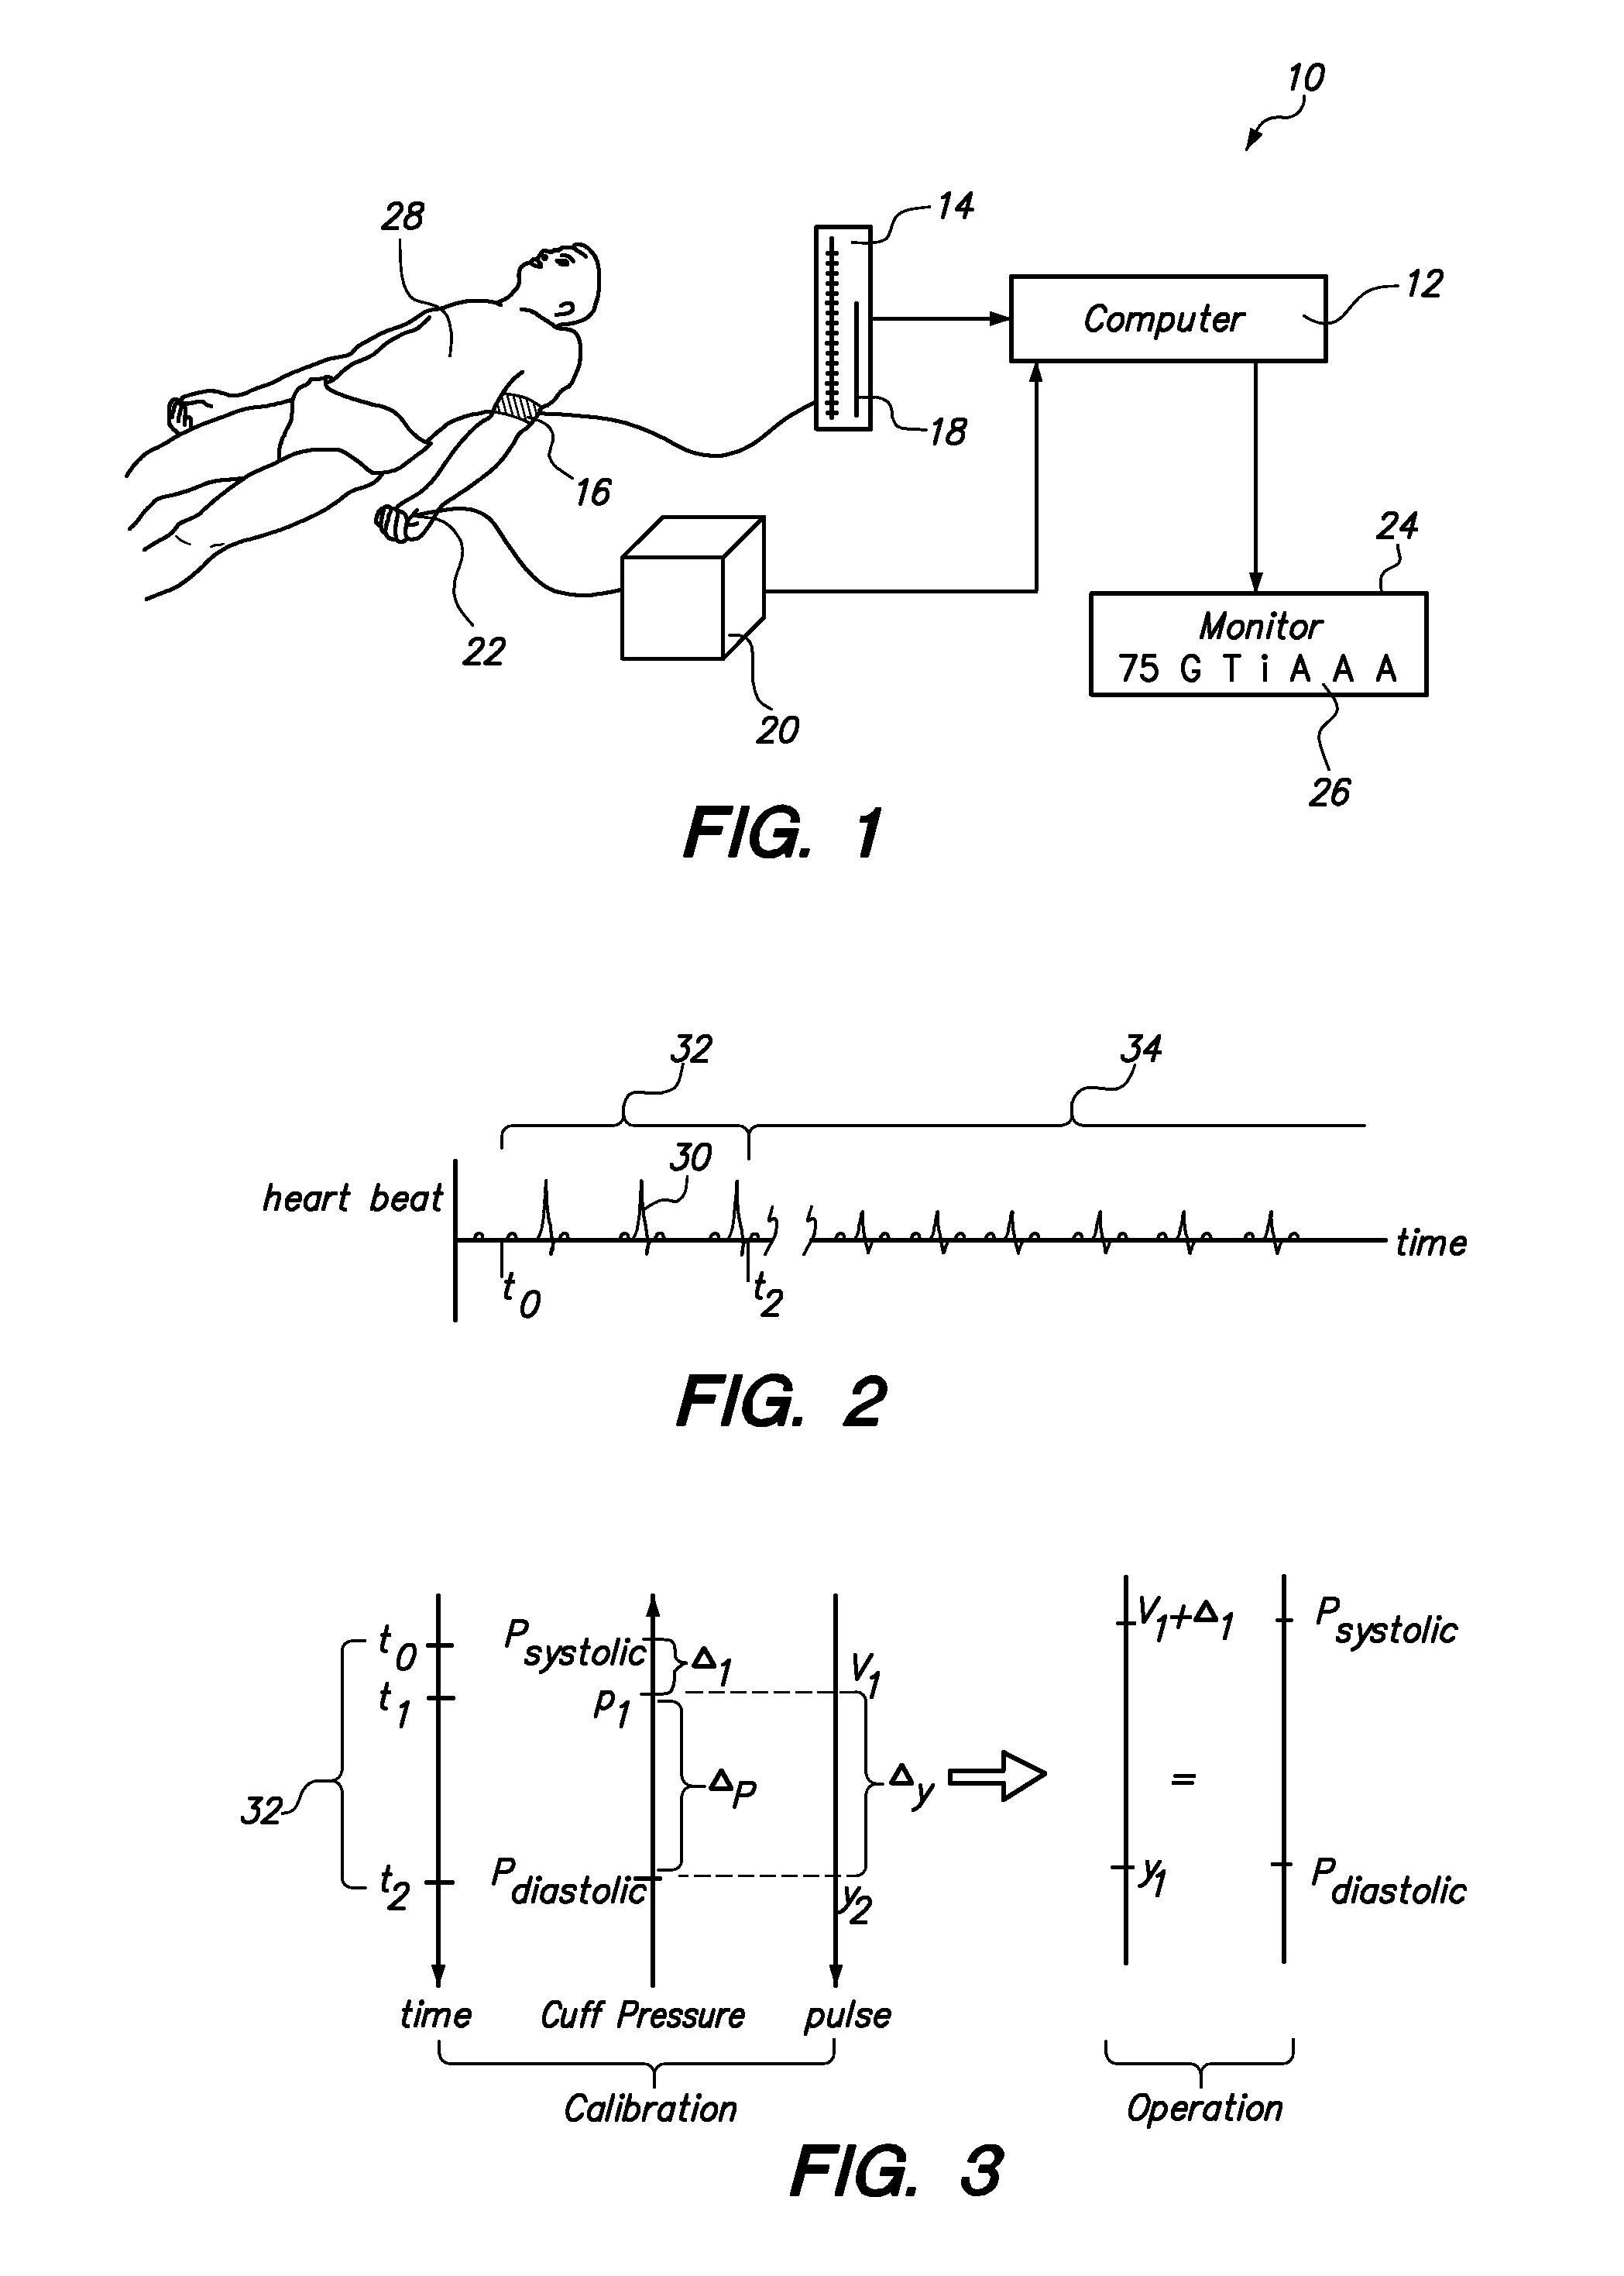 Method for Using a Pulse Oximetry Signal to Monitor Blood Pressure